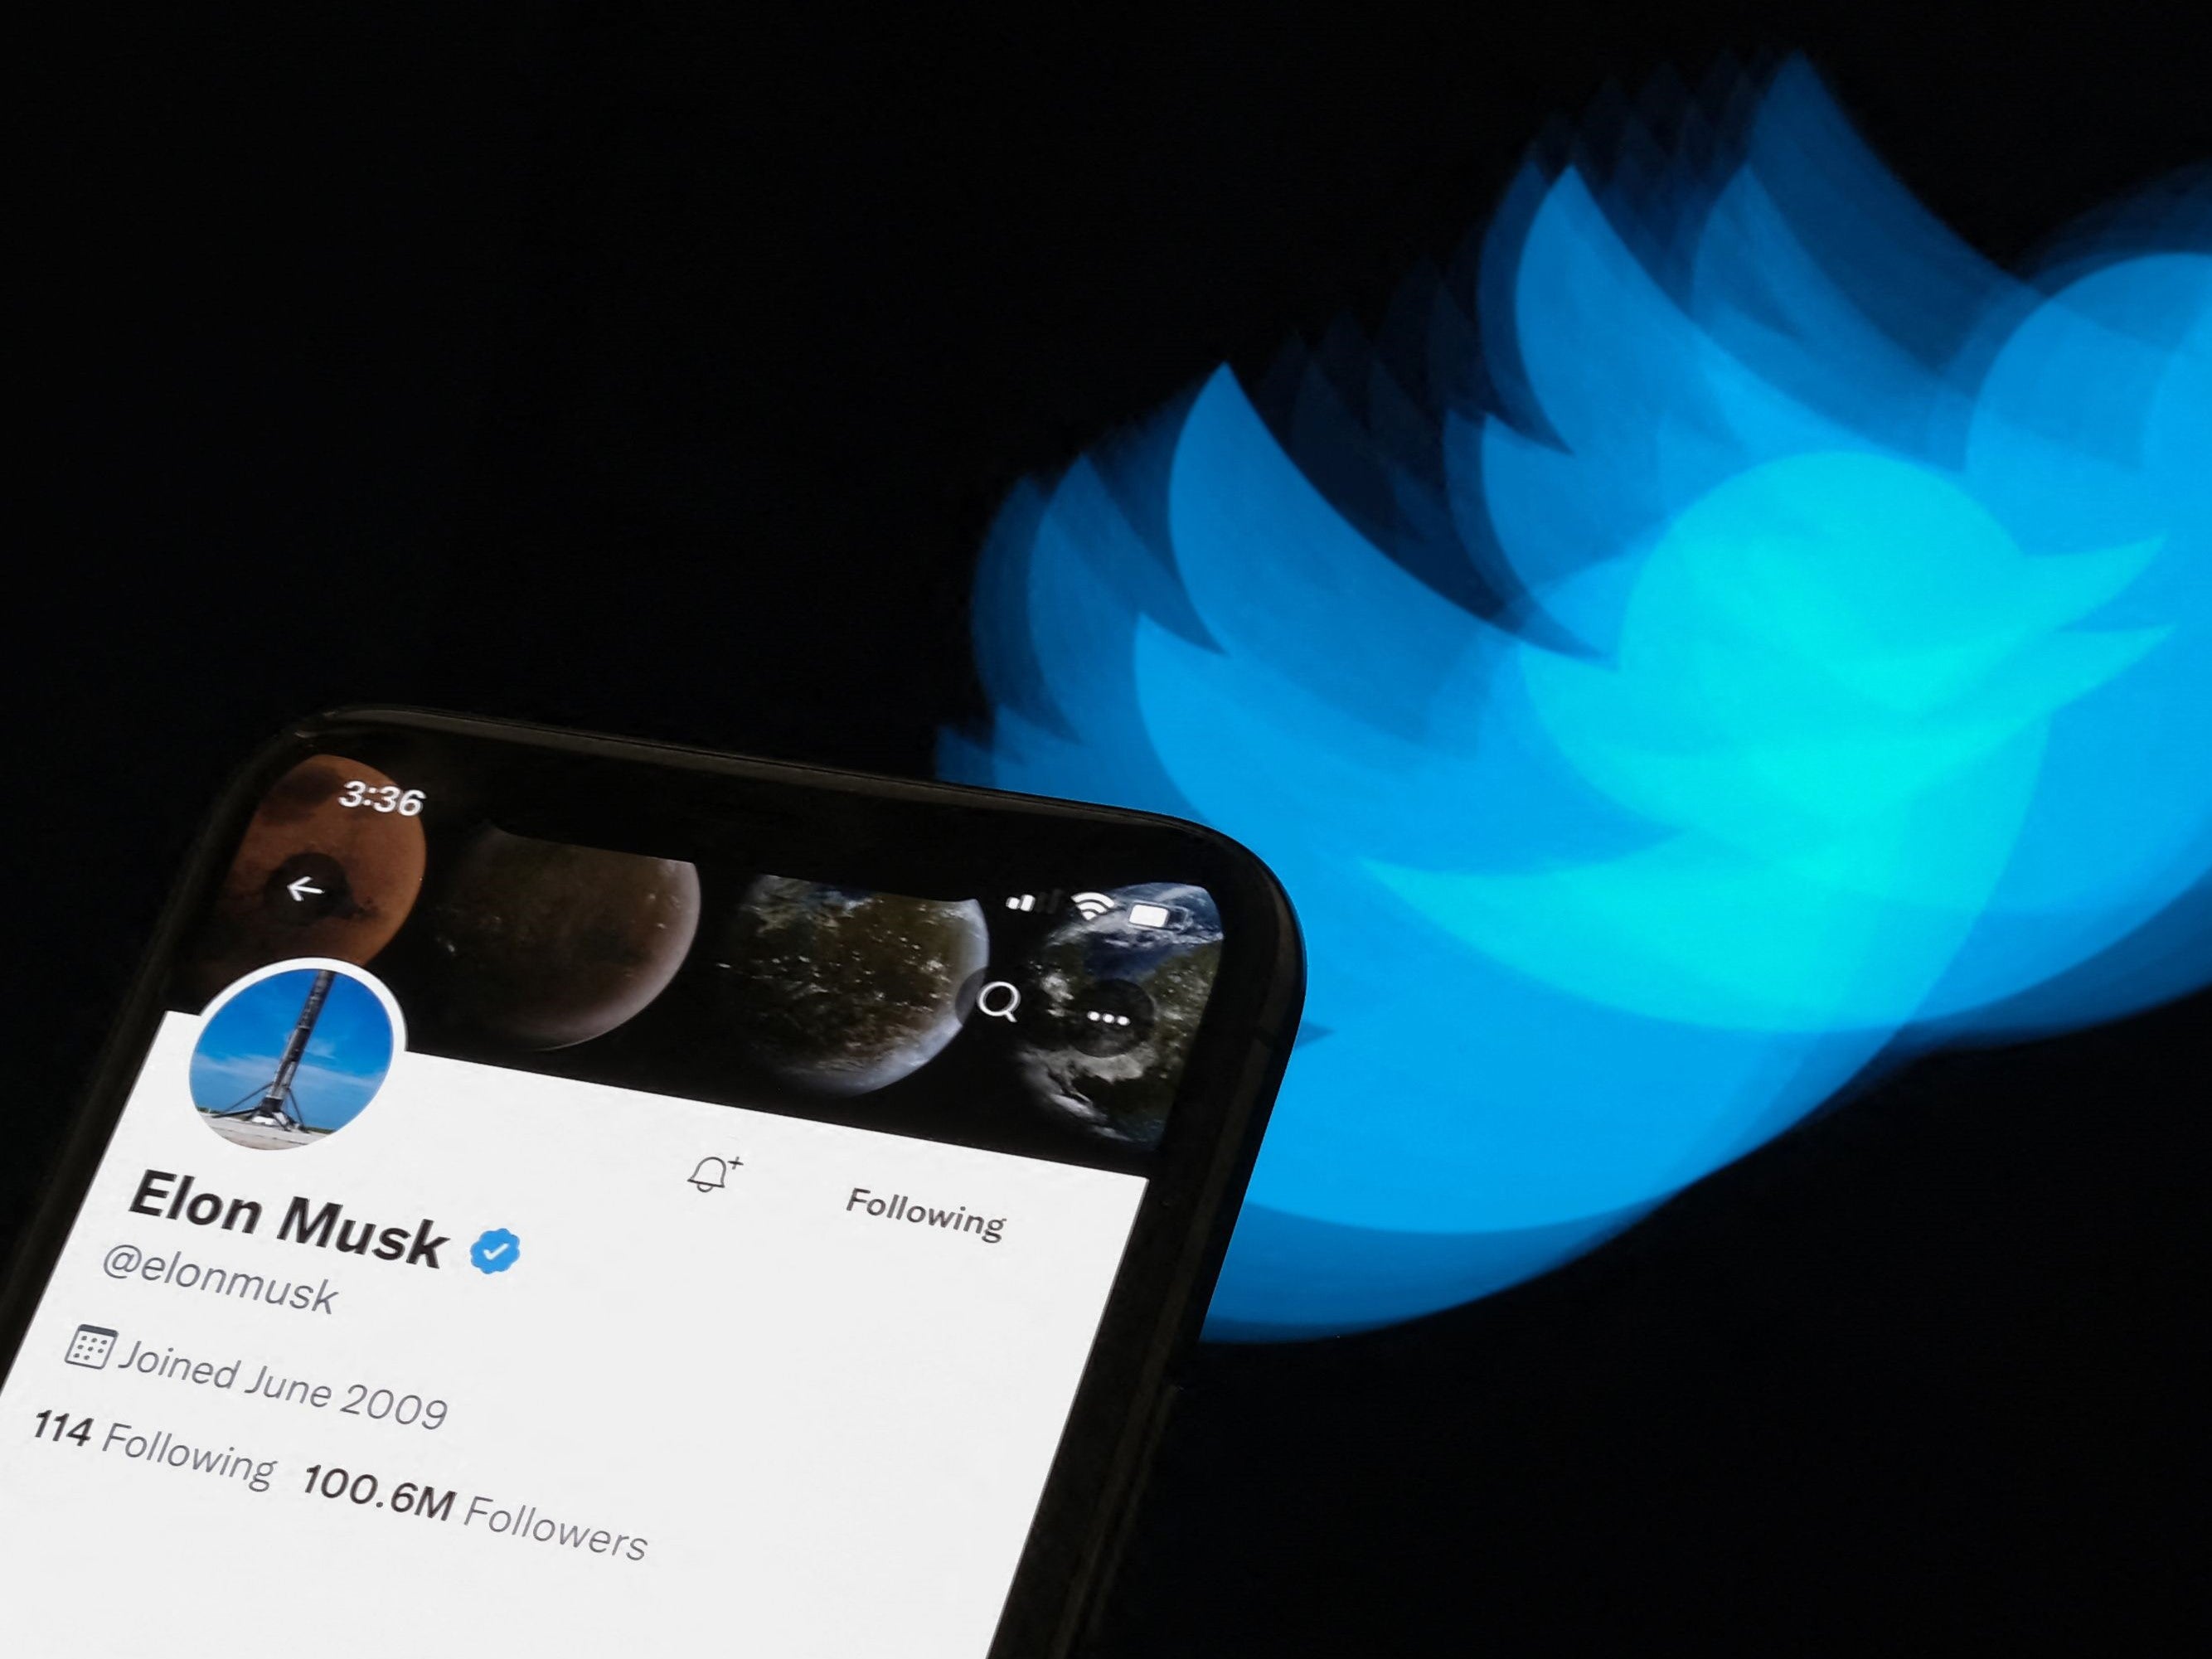 Twitter owner Elon Musk made his account private on 1 February, 2023, as part of a test of the platform